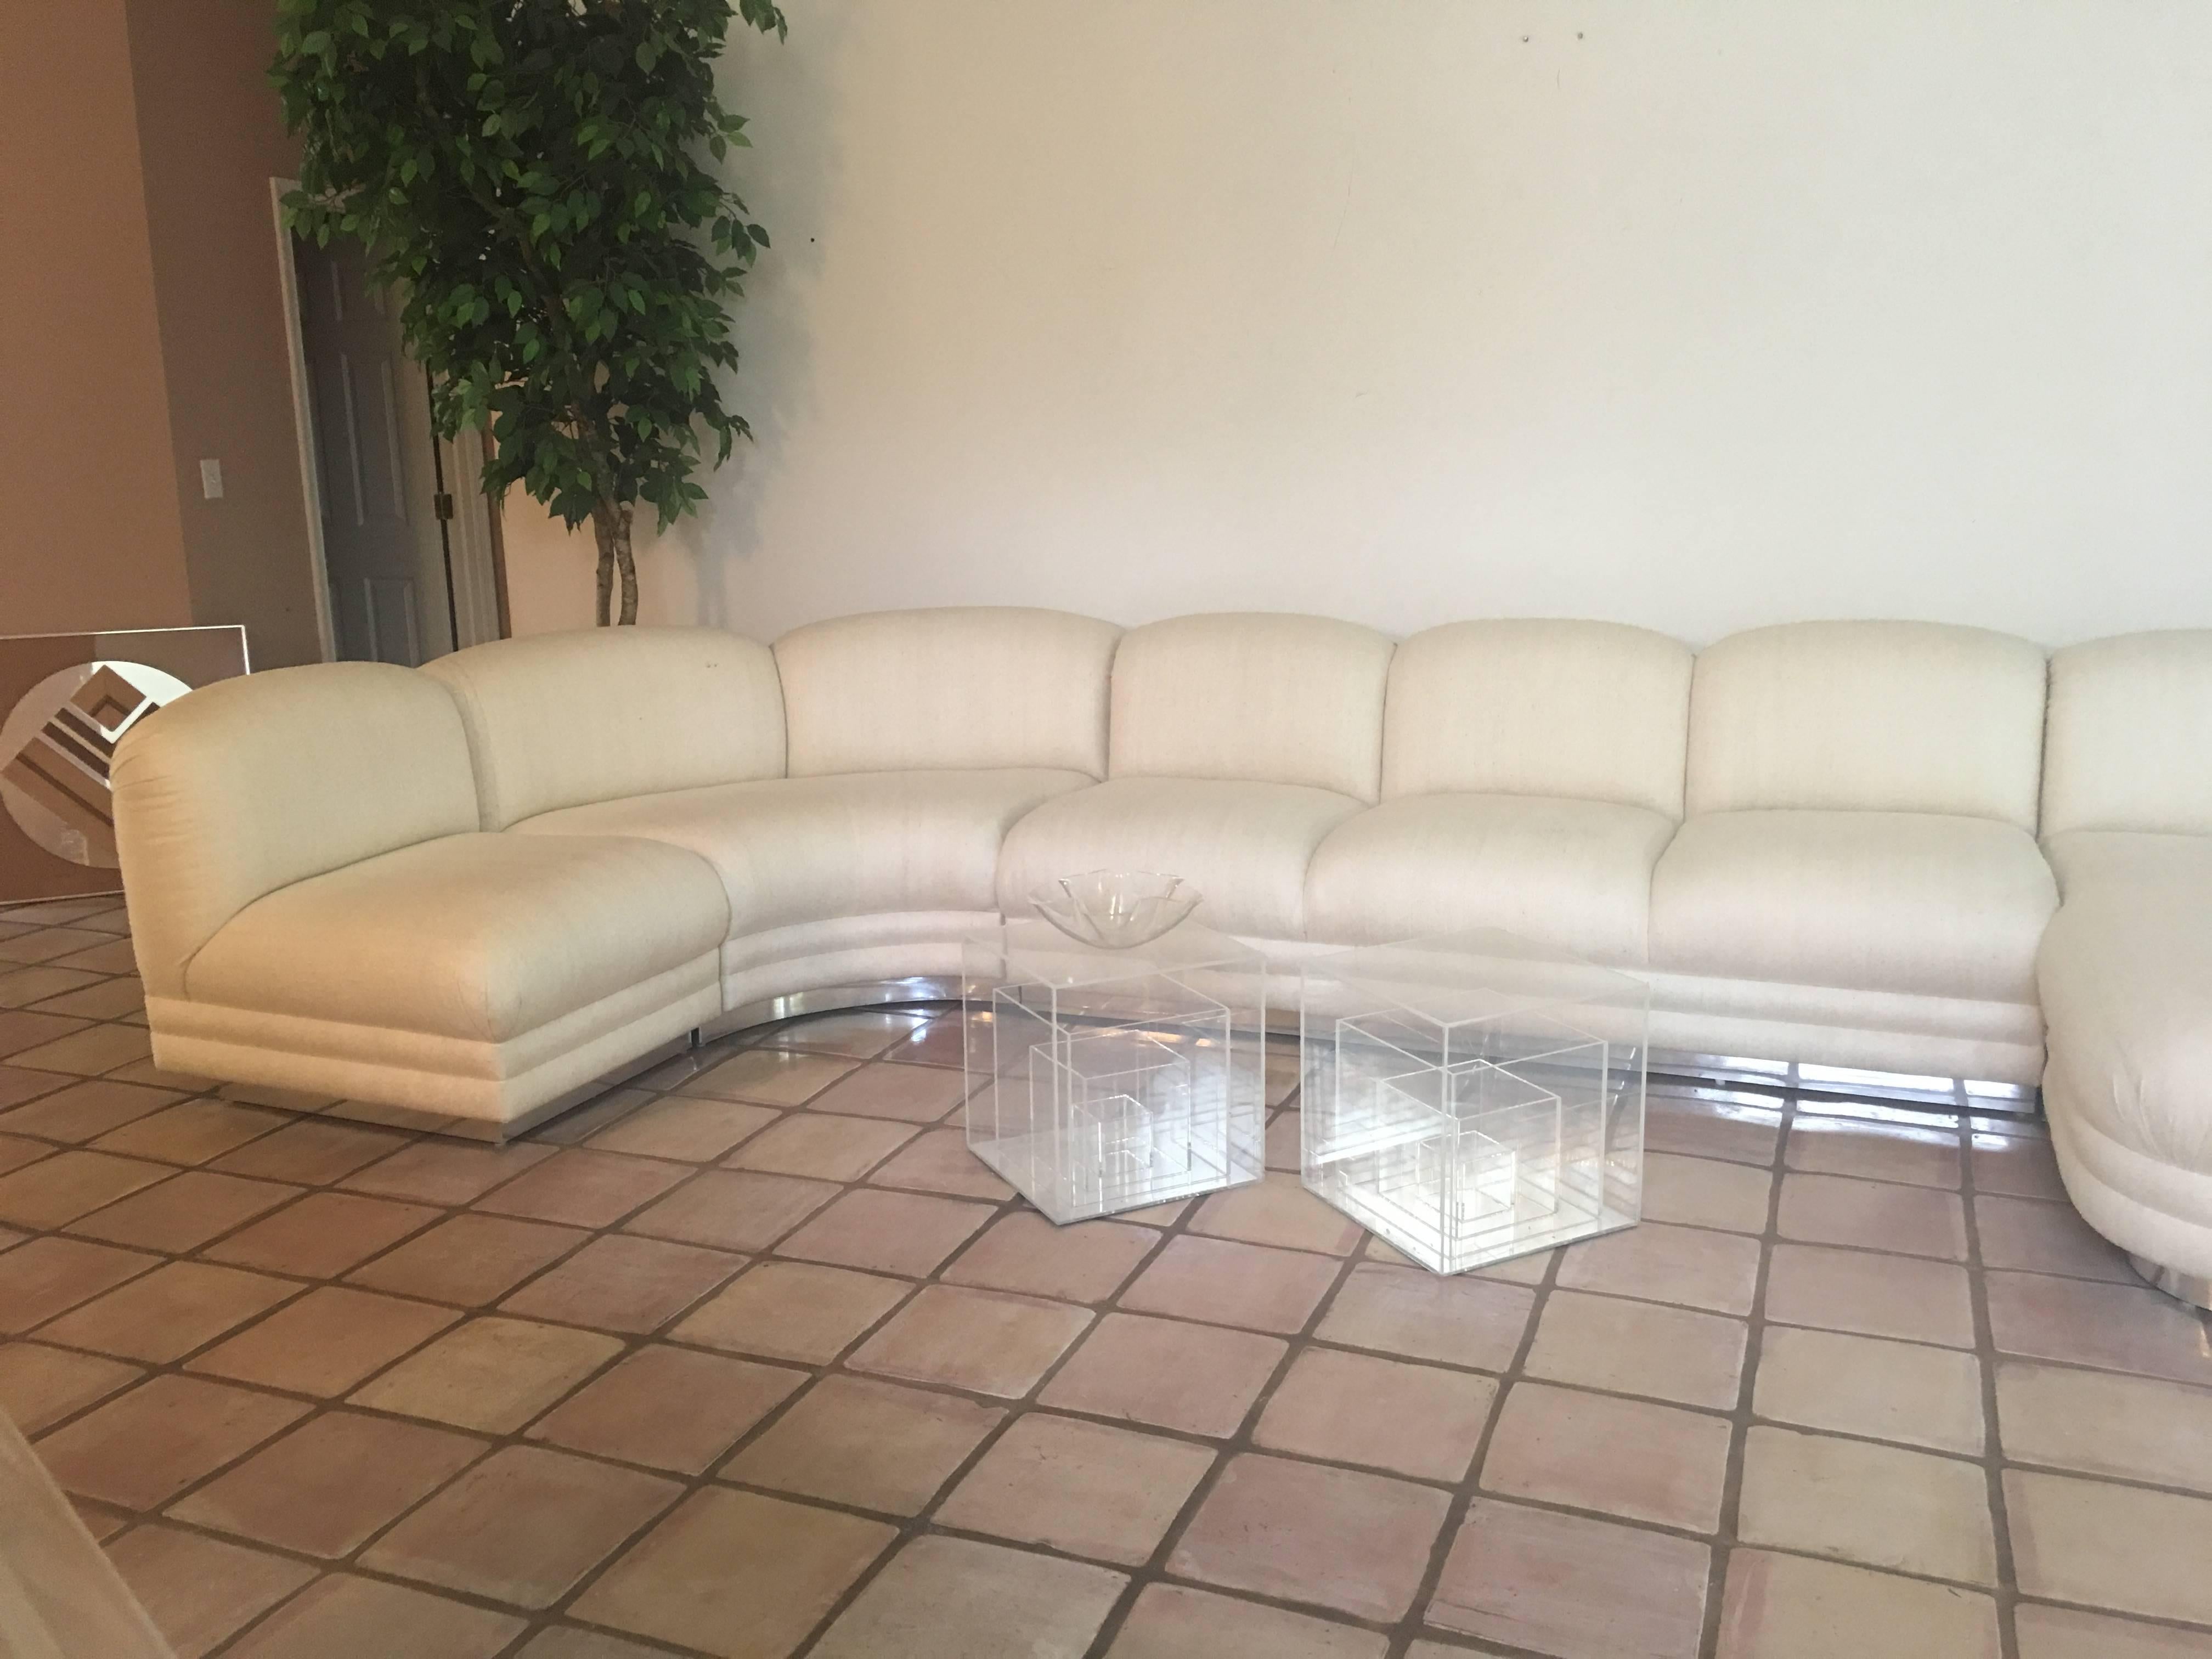 Late 20th Century Sectional Sofa Four-Piece with Chaise Chrome Base in Milo Baughman Style